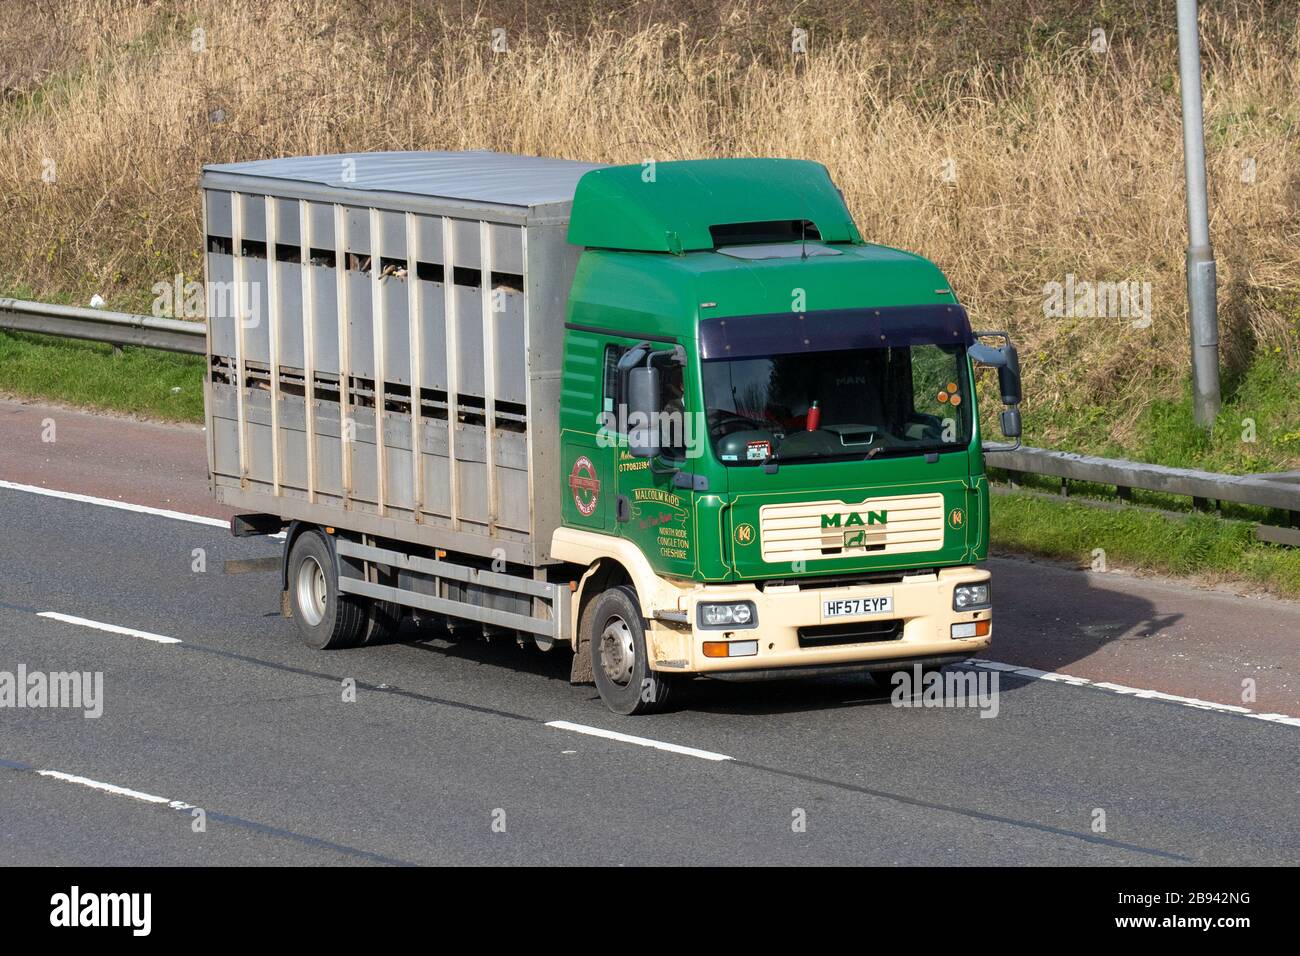 Livestock Haulage delivery trucks, lorry, transportation, truck, cargo carrier, MAN vehicle, European commercial transport, industry, M6 at Manchester, UK Stock Photo